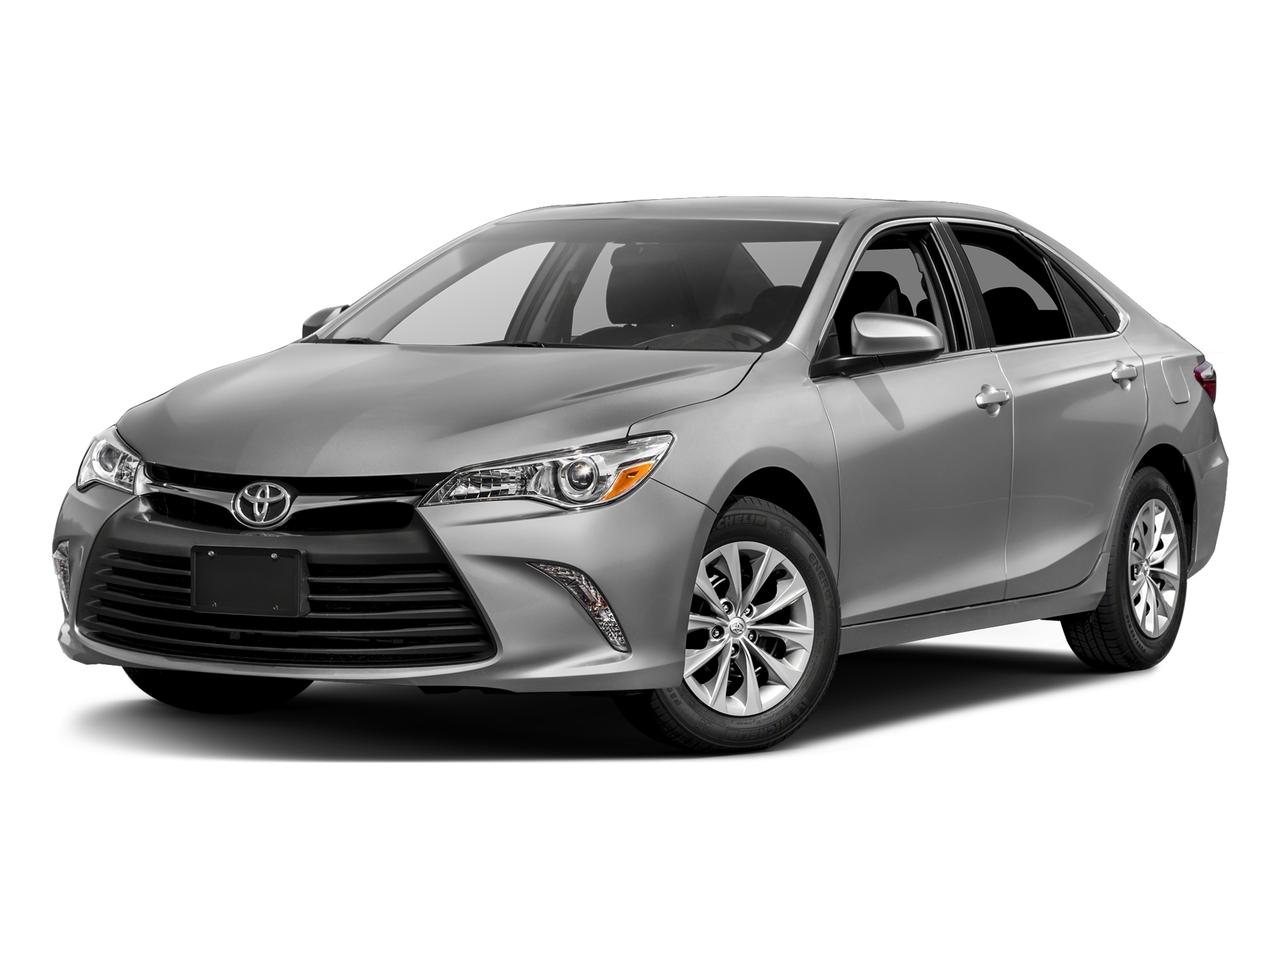 2017 Toyota Camry Vehicle Photo in Odessa, TX 79762